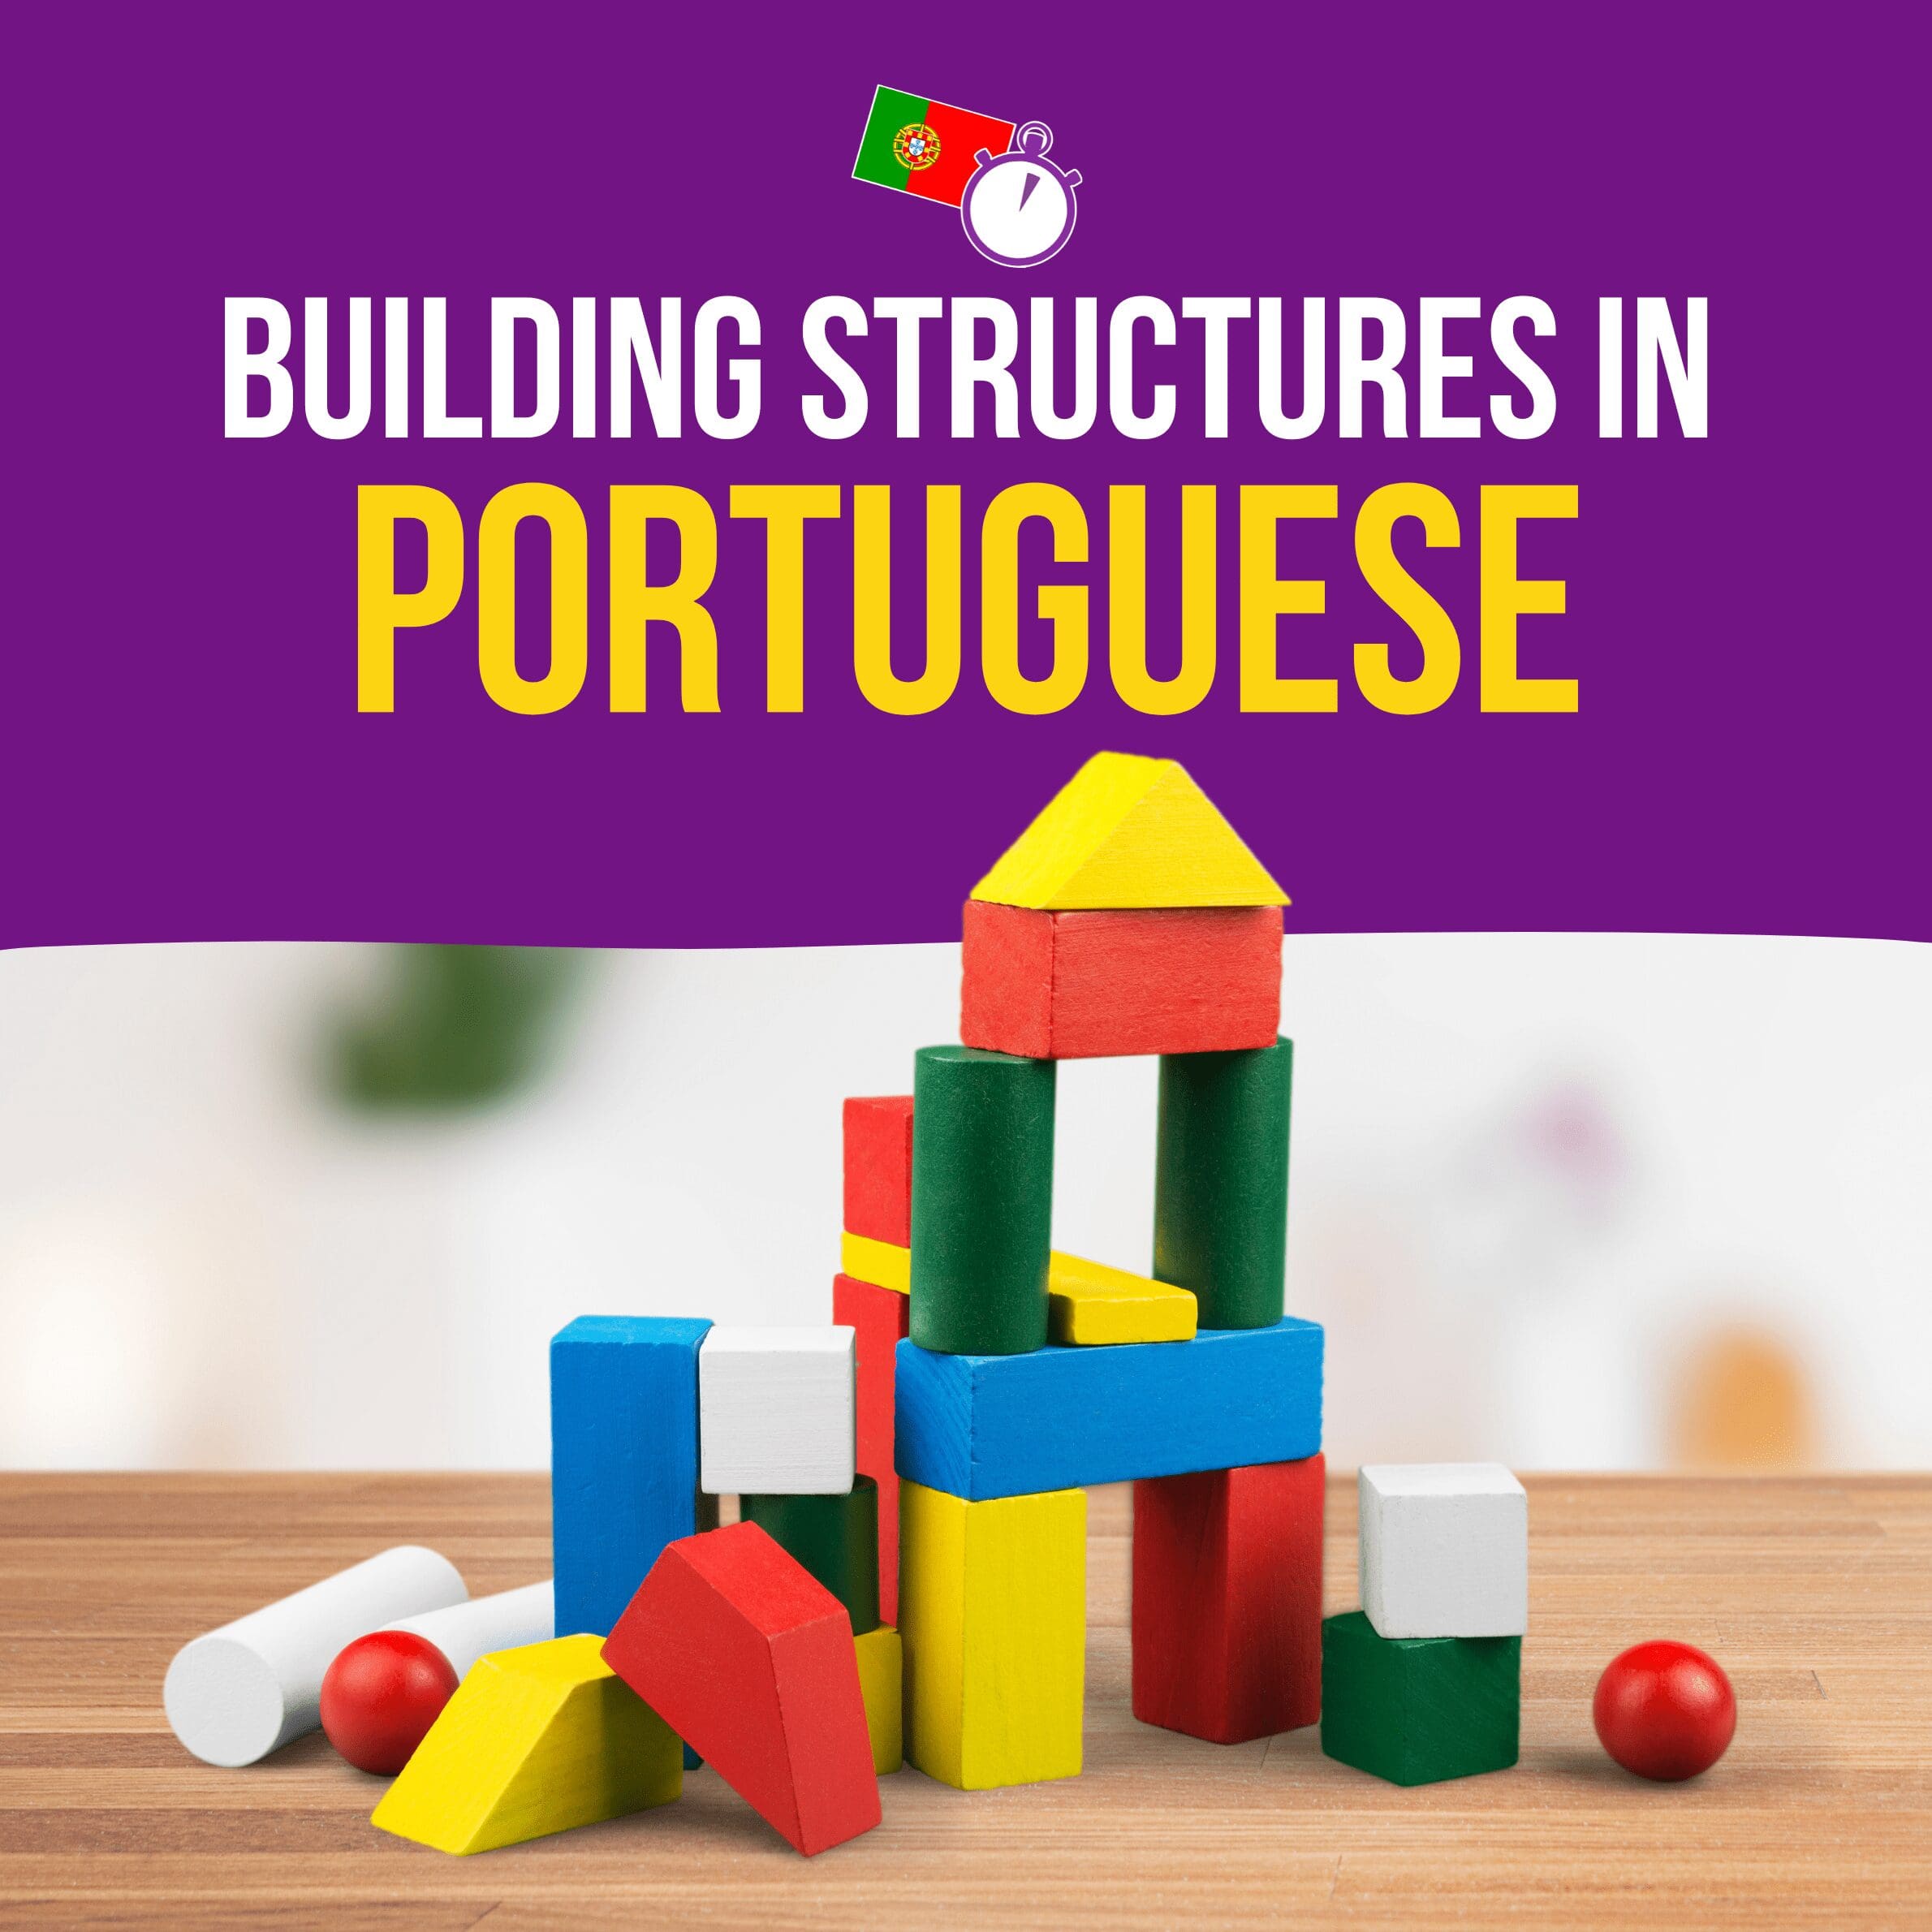 Building Structures in Portuguese